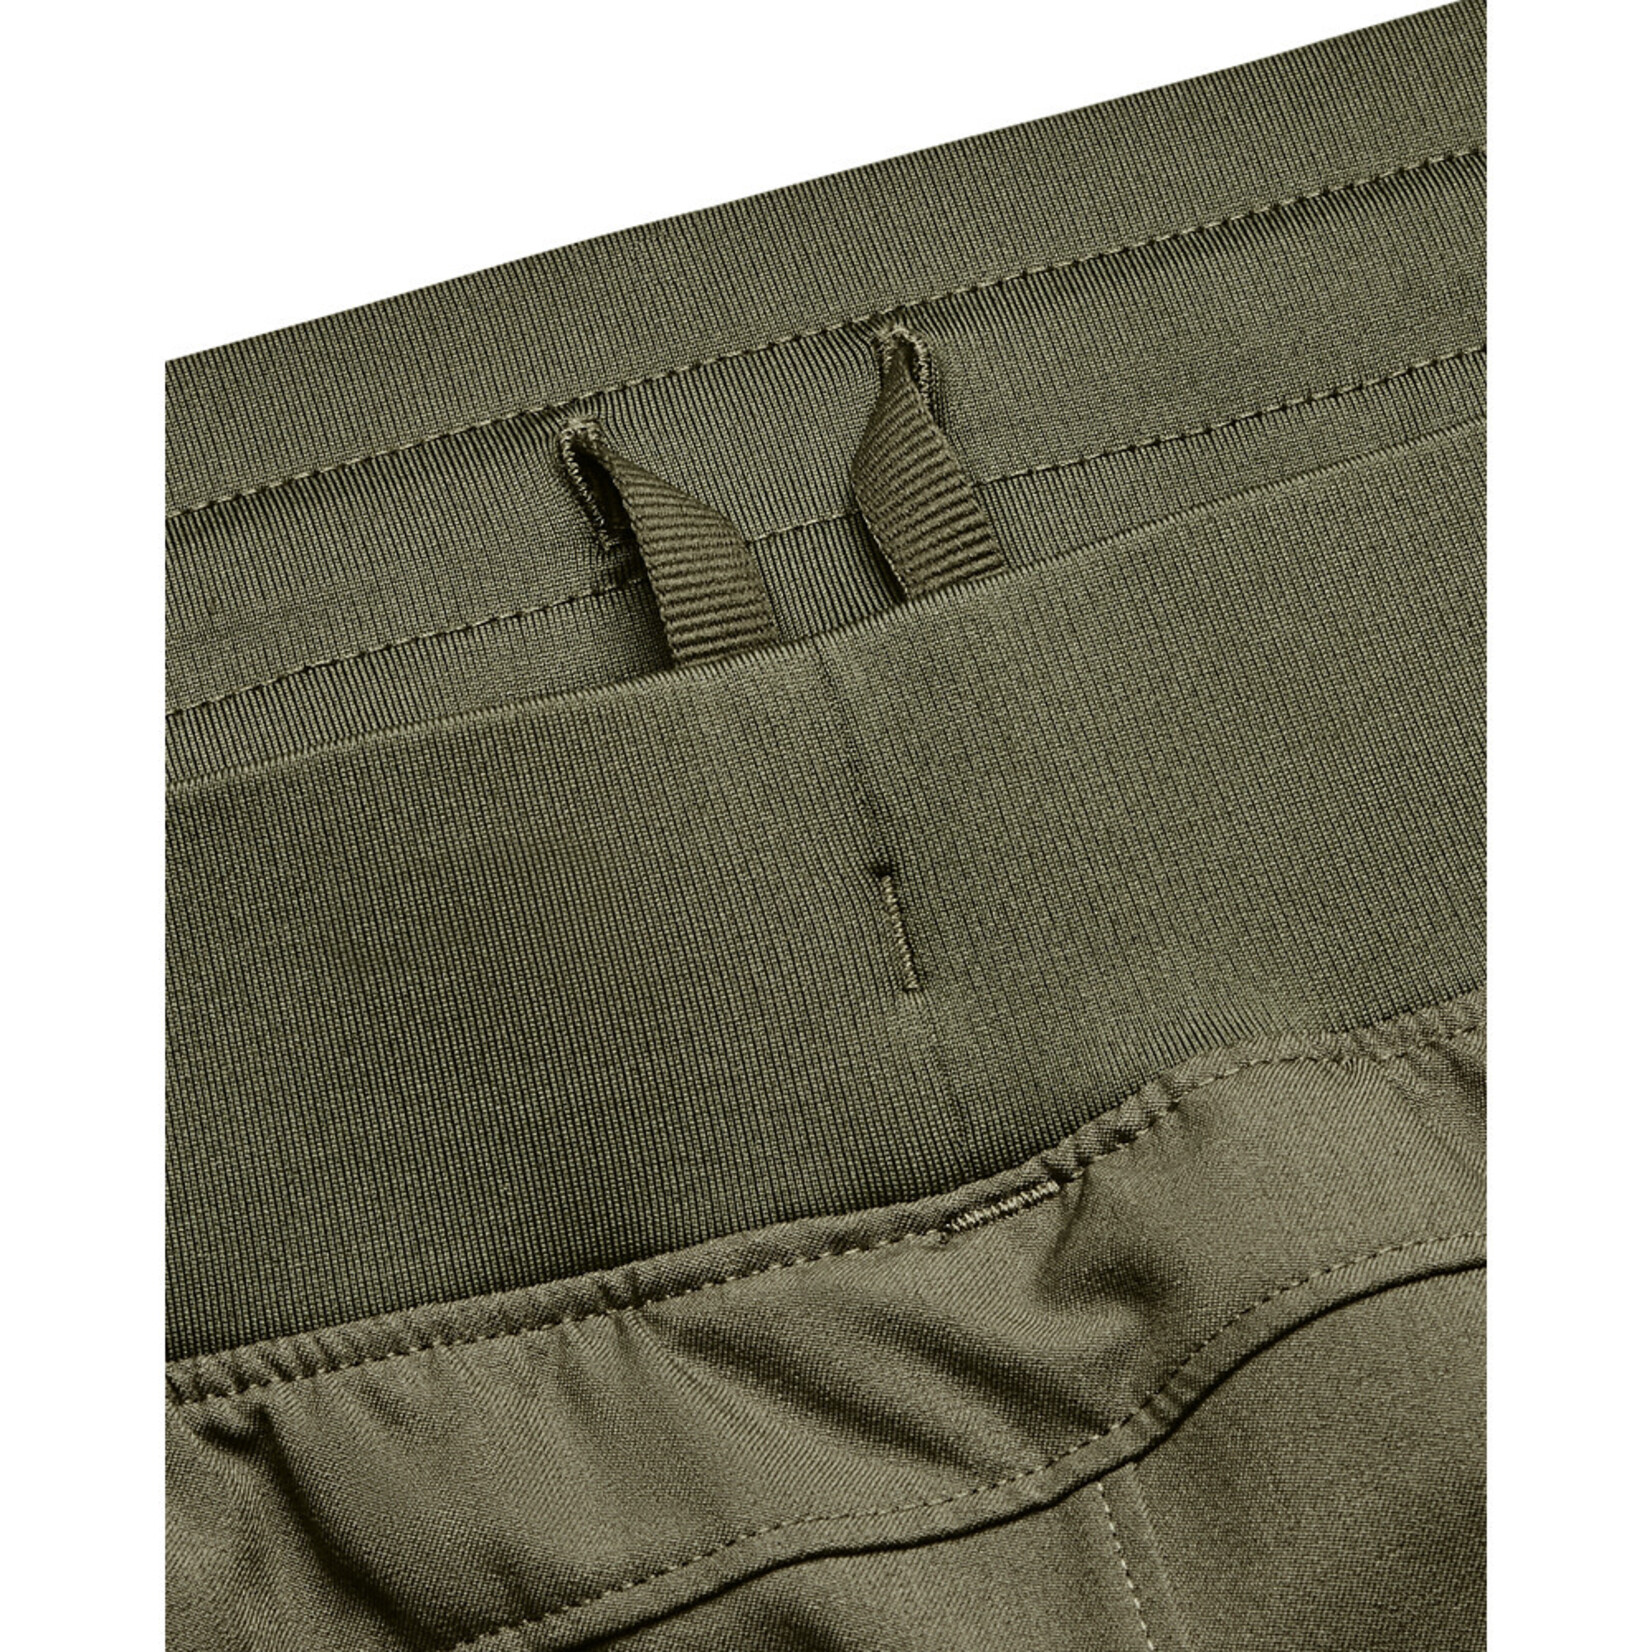 Under Armour Ua Unstoppable Joggers-Grn